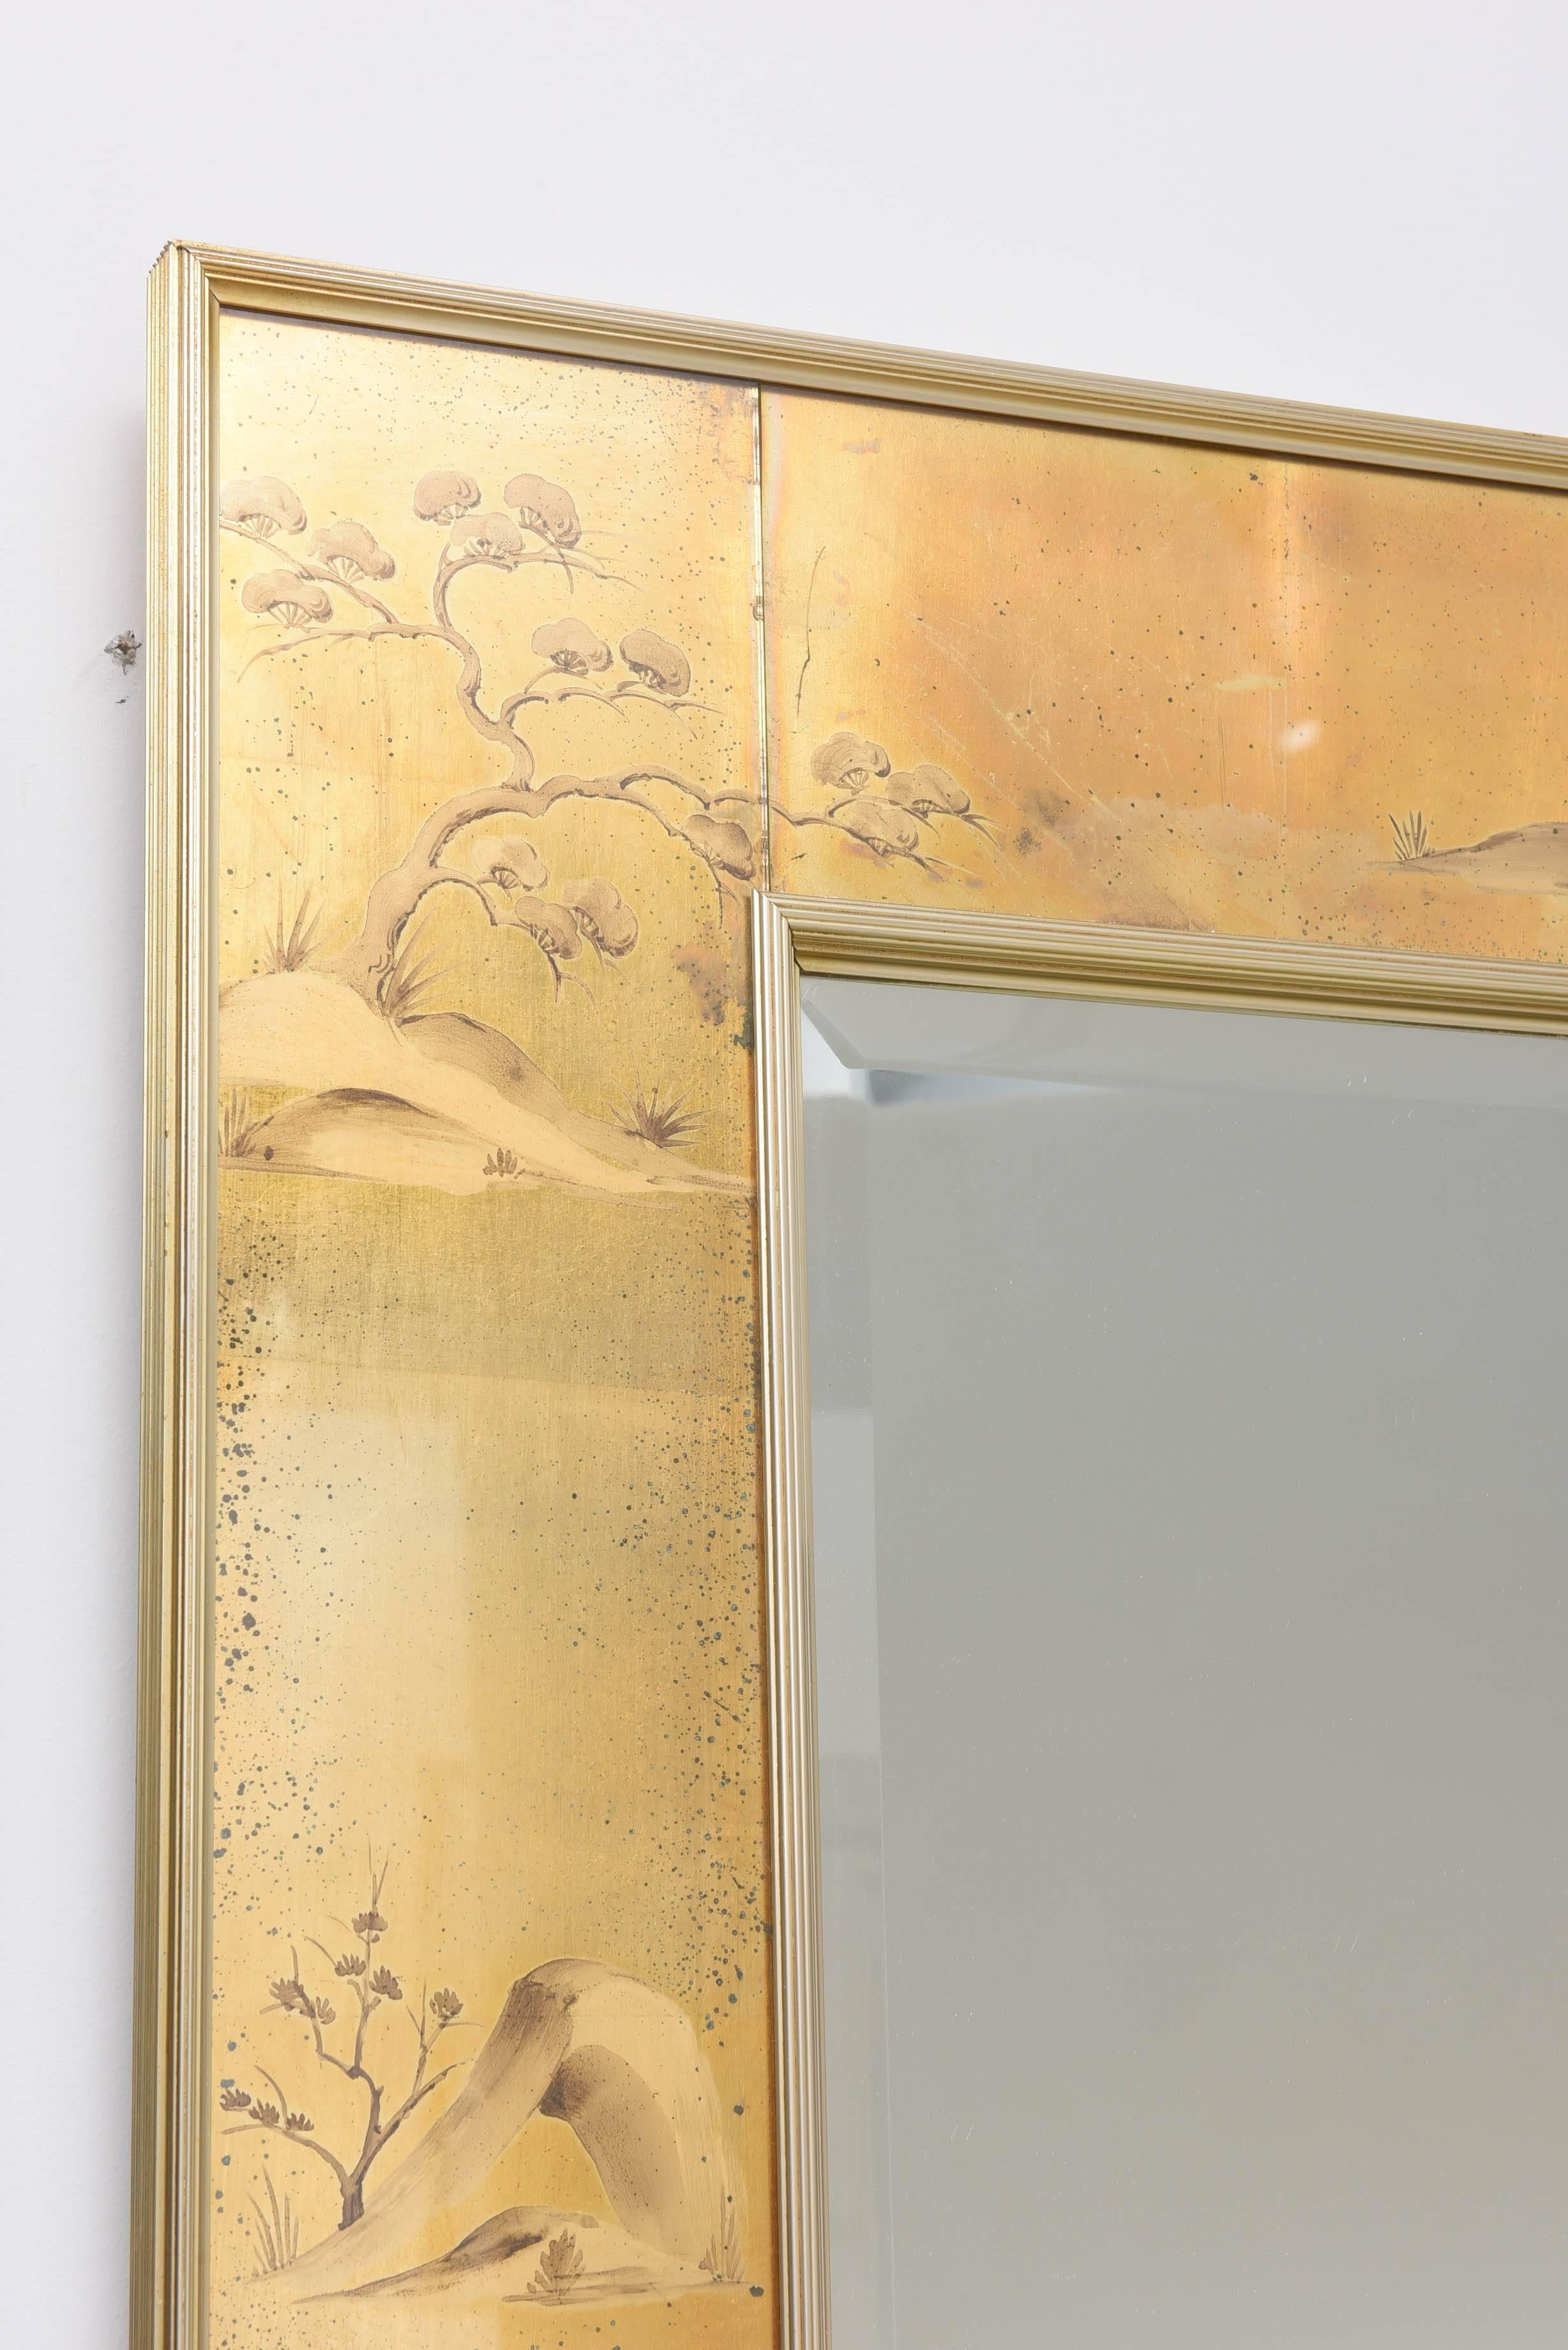 20th Century La Barge Mirror with Églomisé Style Panels Depicting Chinoiserie Scenes in Gold